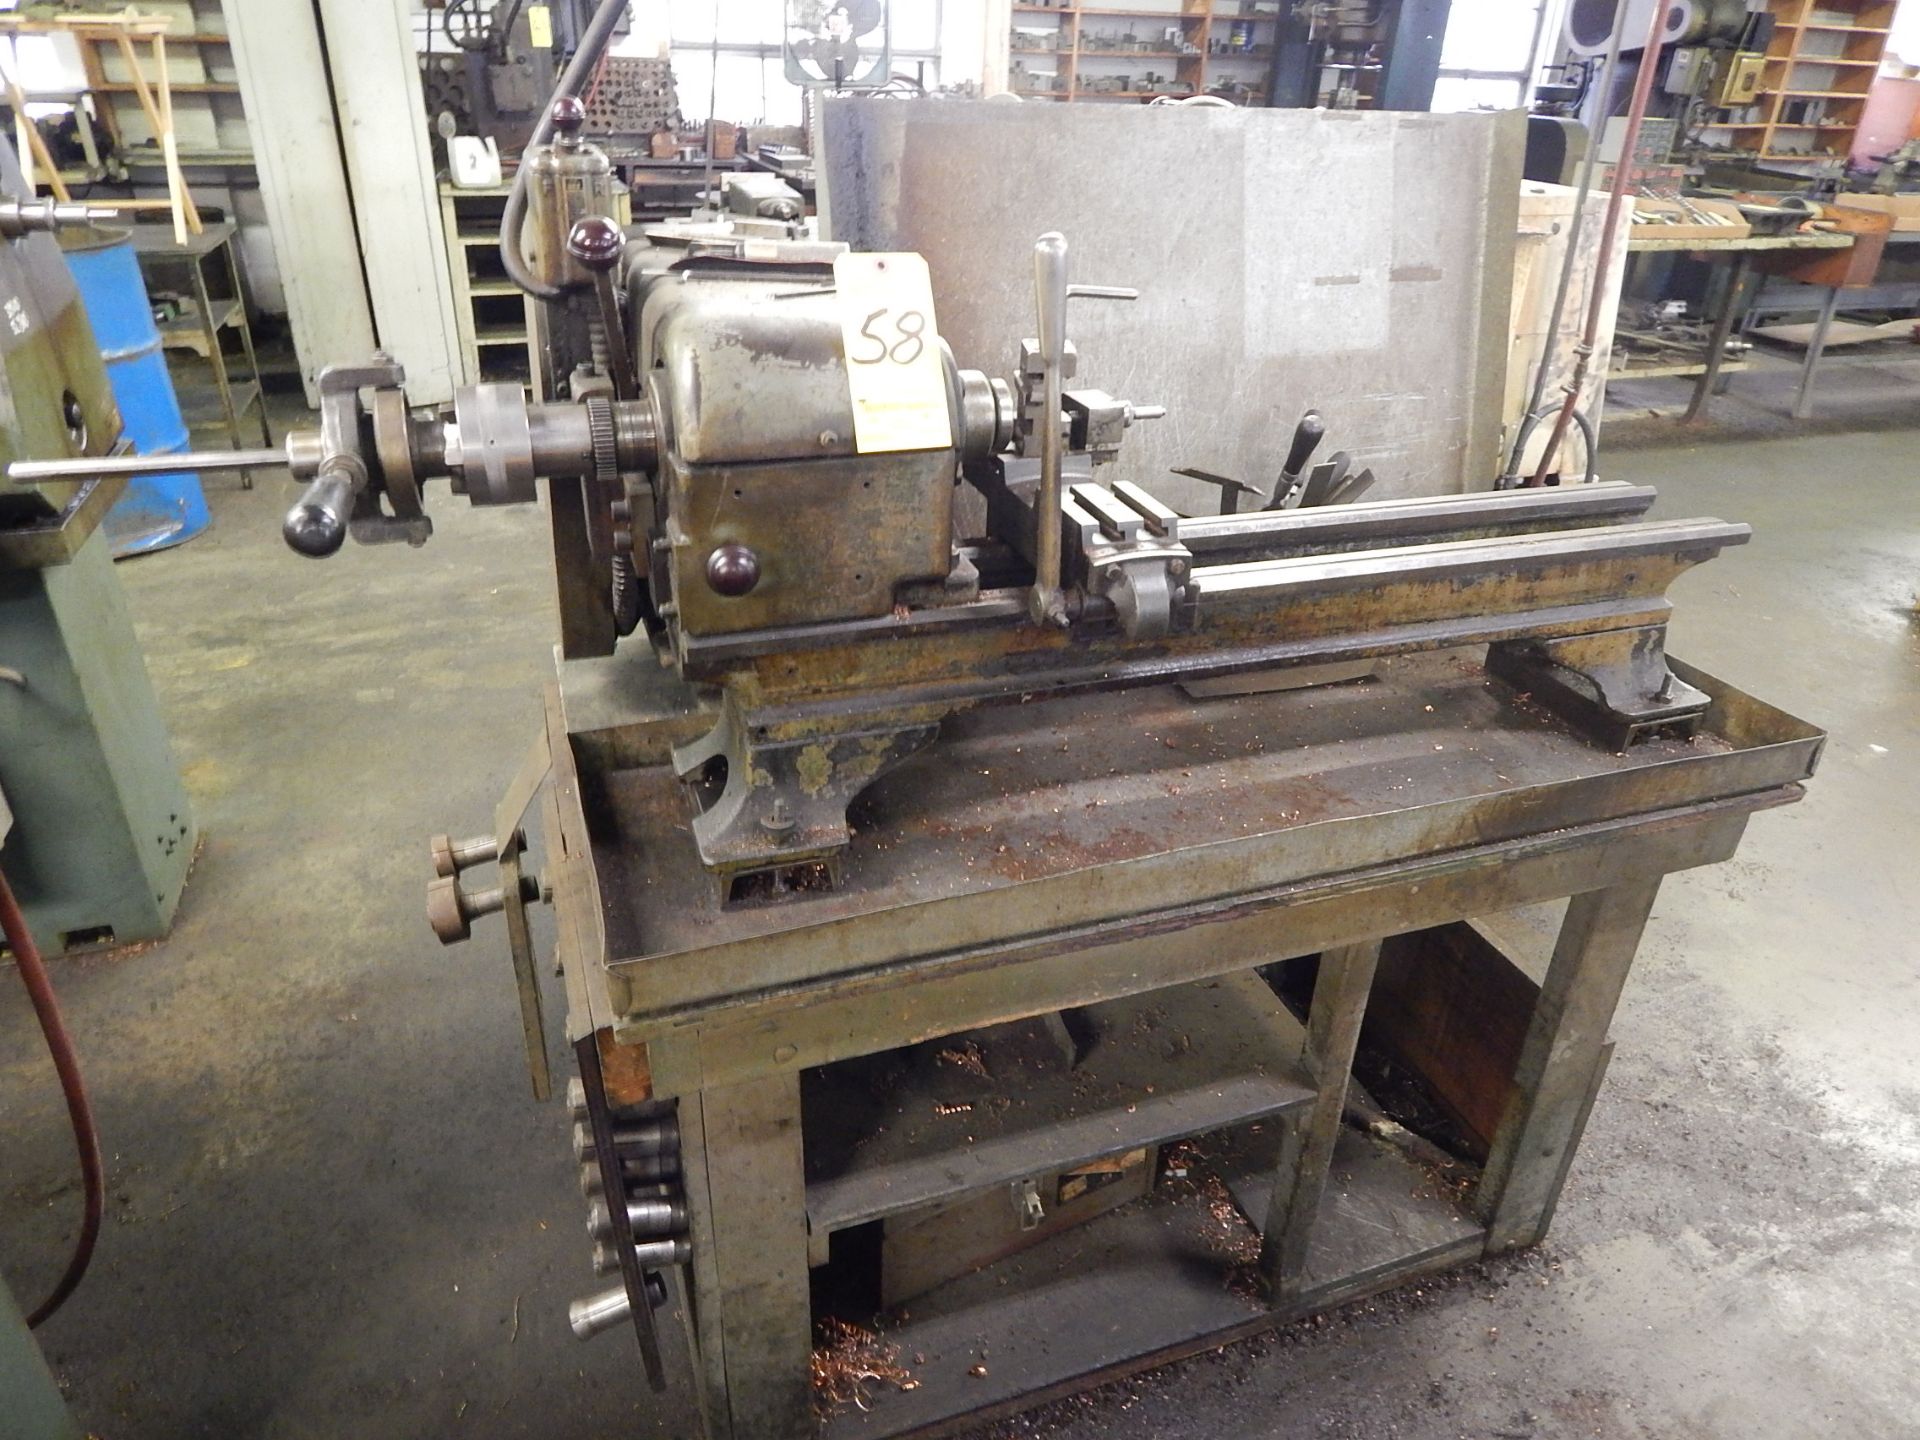 Sheldon 12" Bench Lathe, 5C Collet Closer, No Tailstock, Loading Fee $100.00 - Image 3 of 3